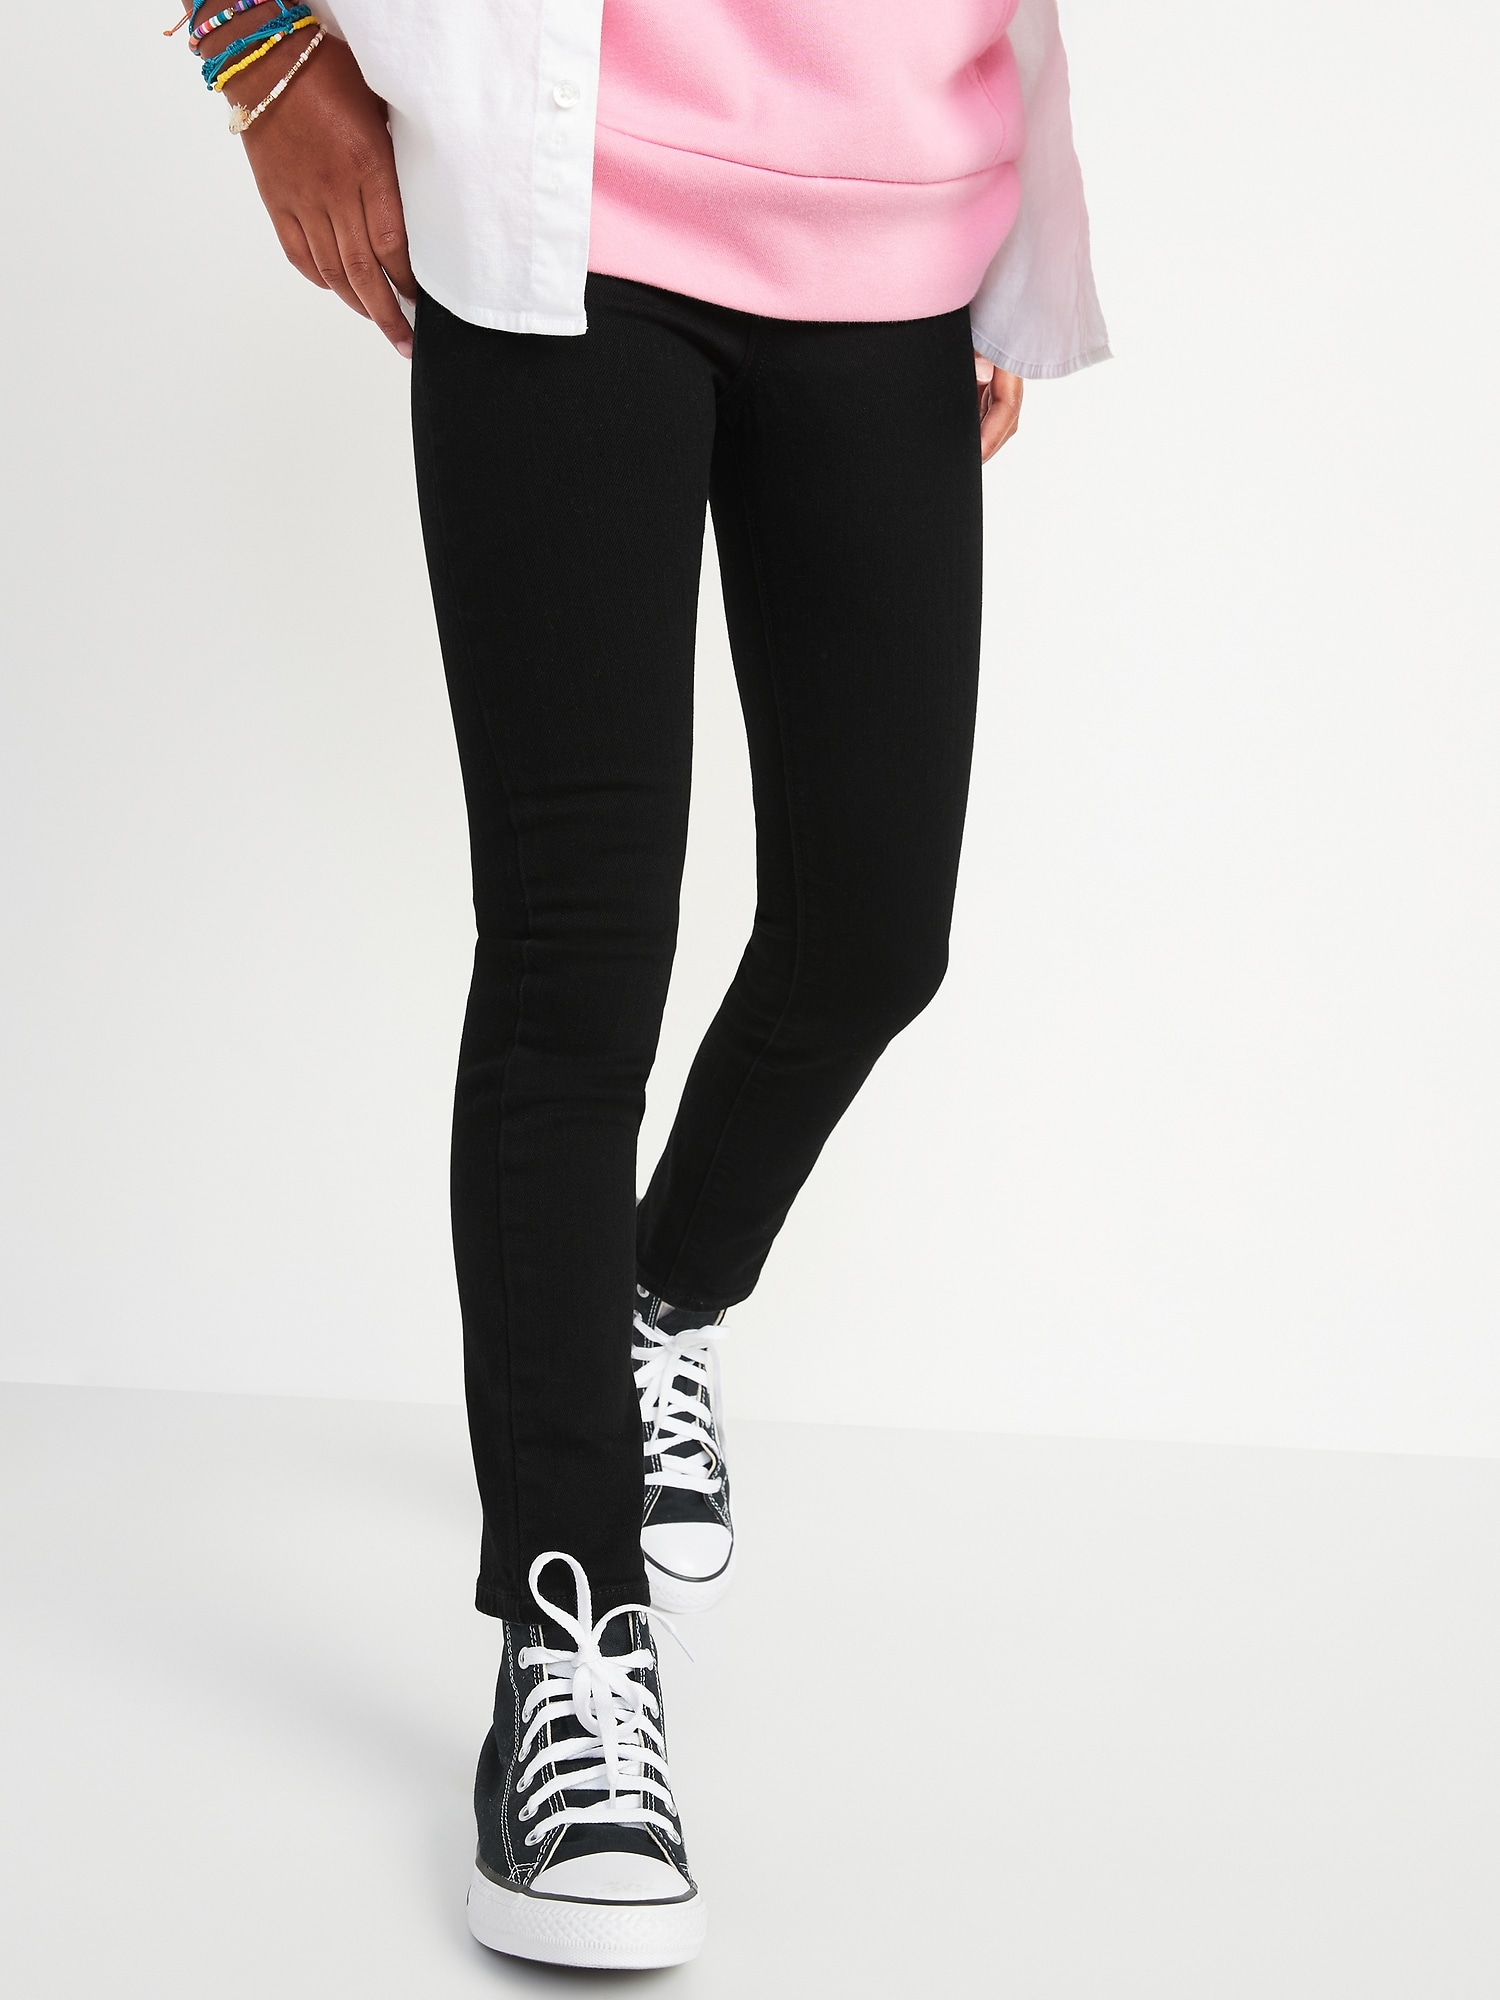 Wow Skinny Pull On Black Jeans For Girls Old Navy